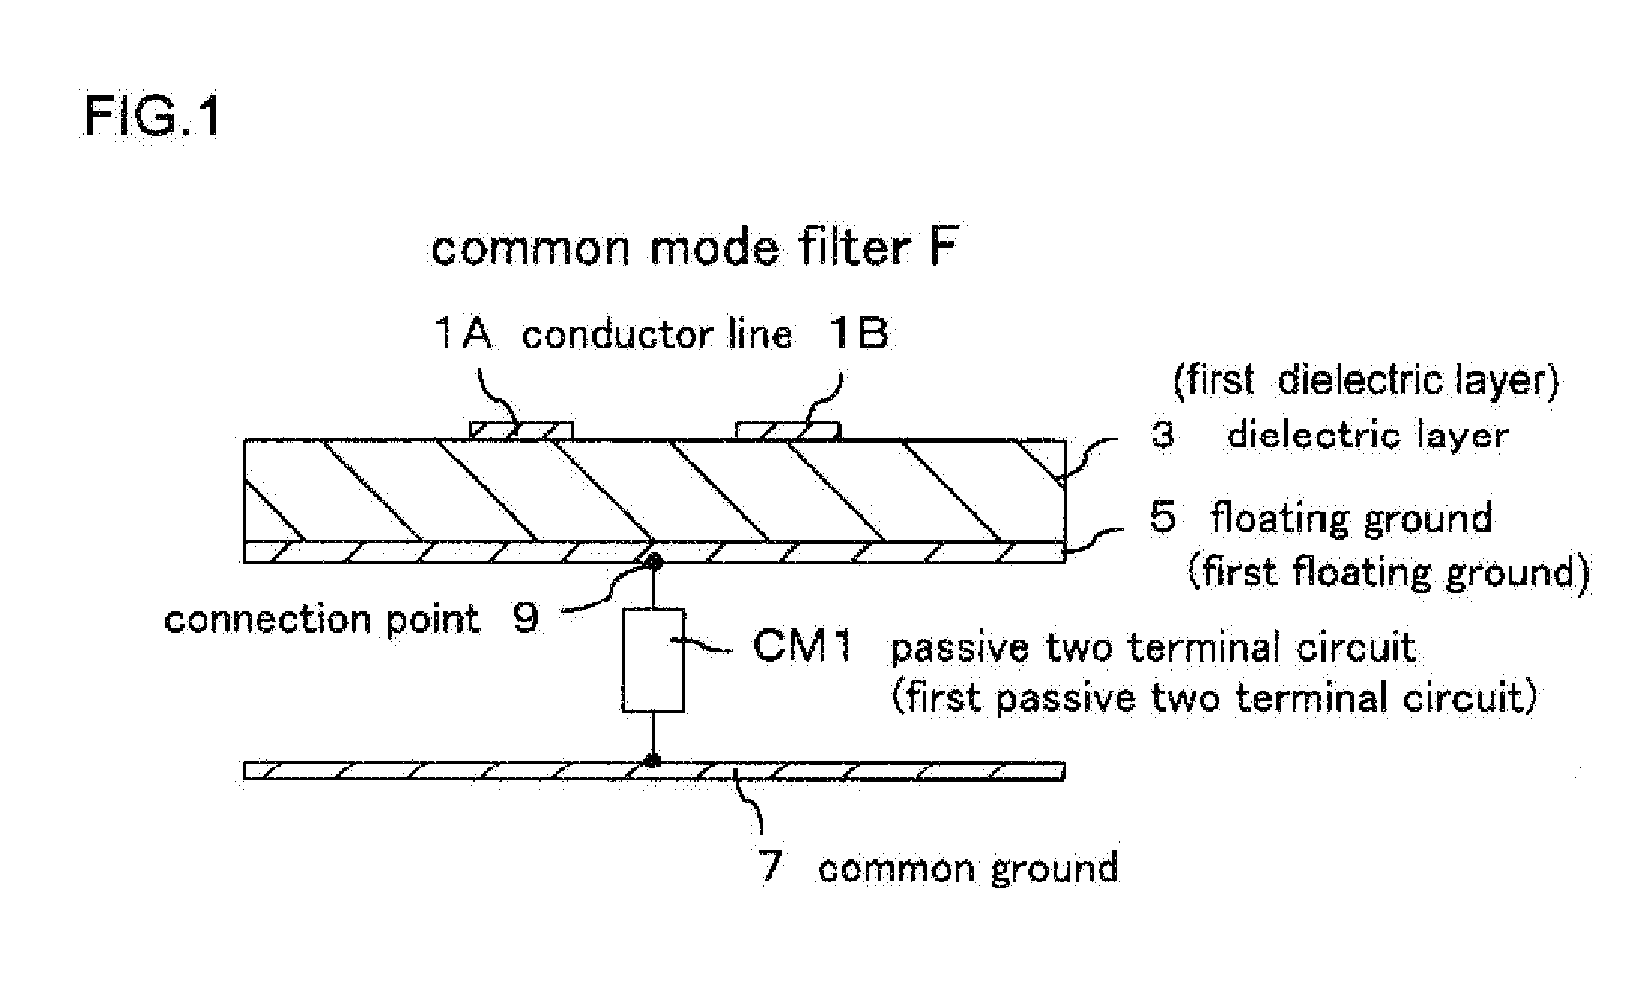 Common mode filter